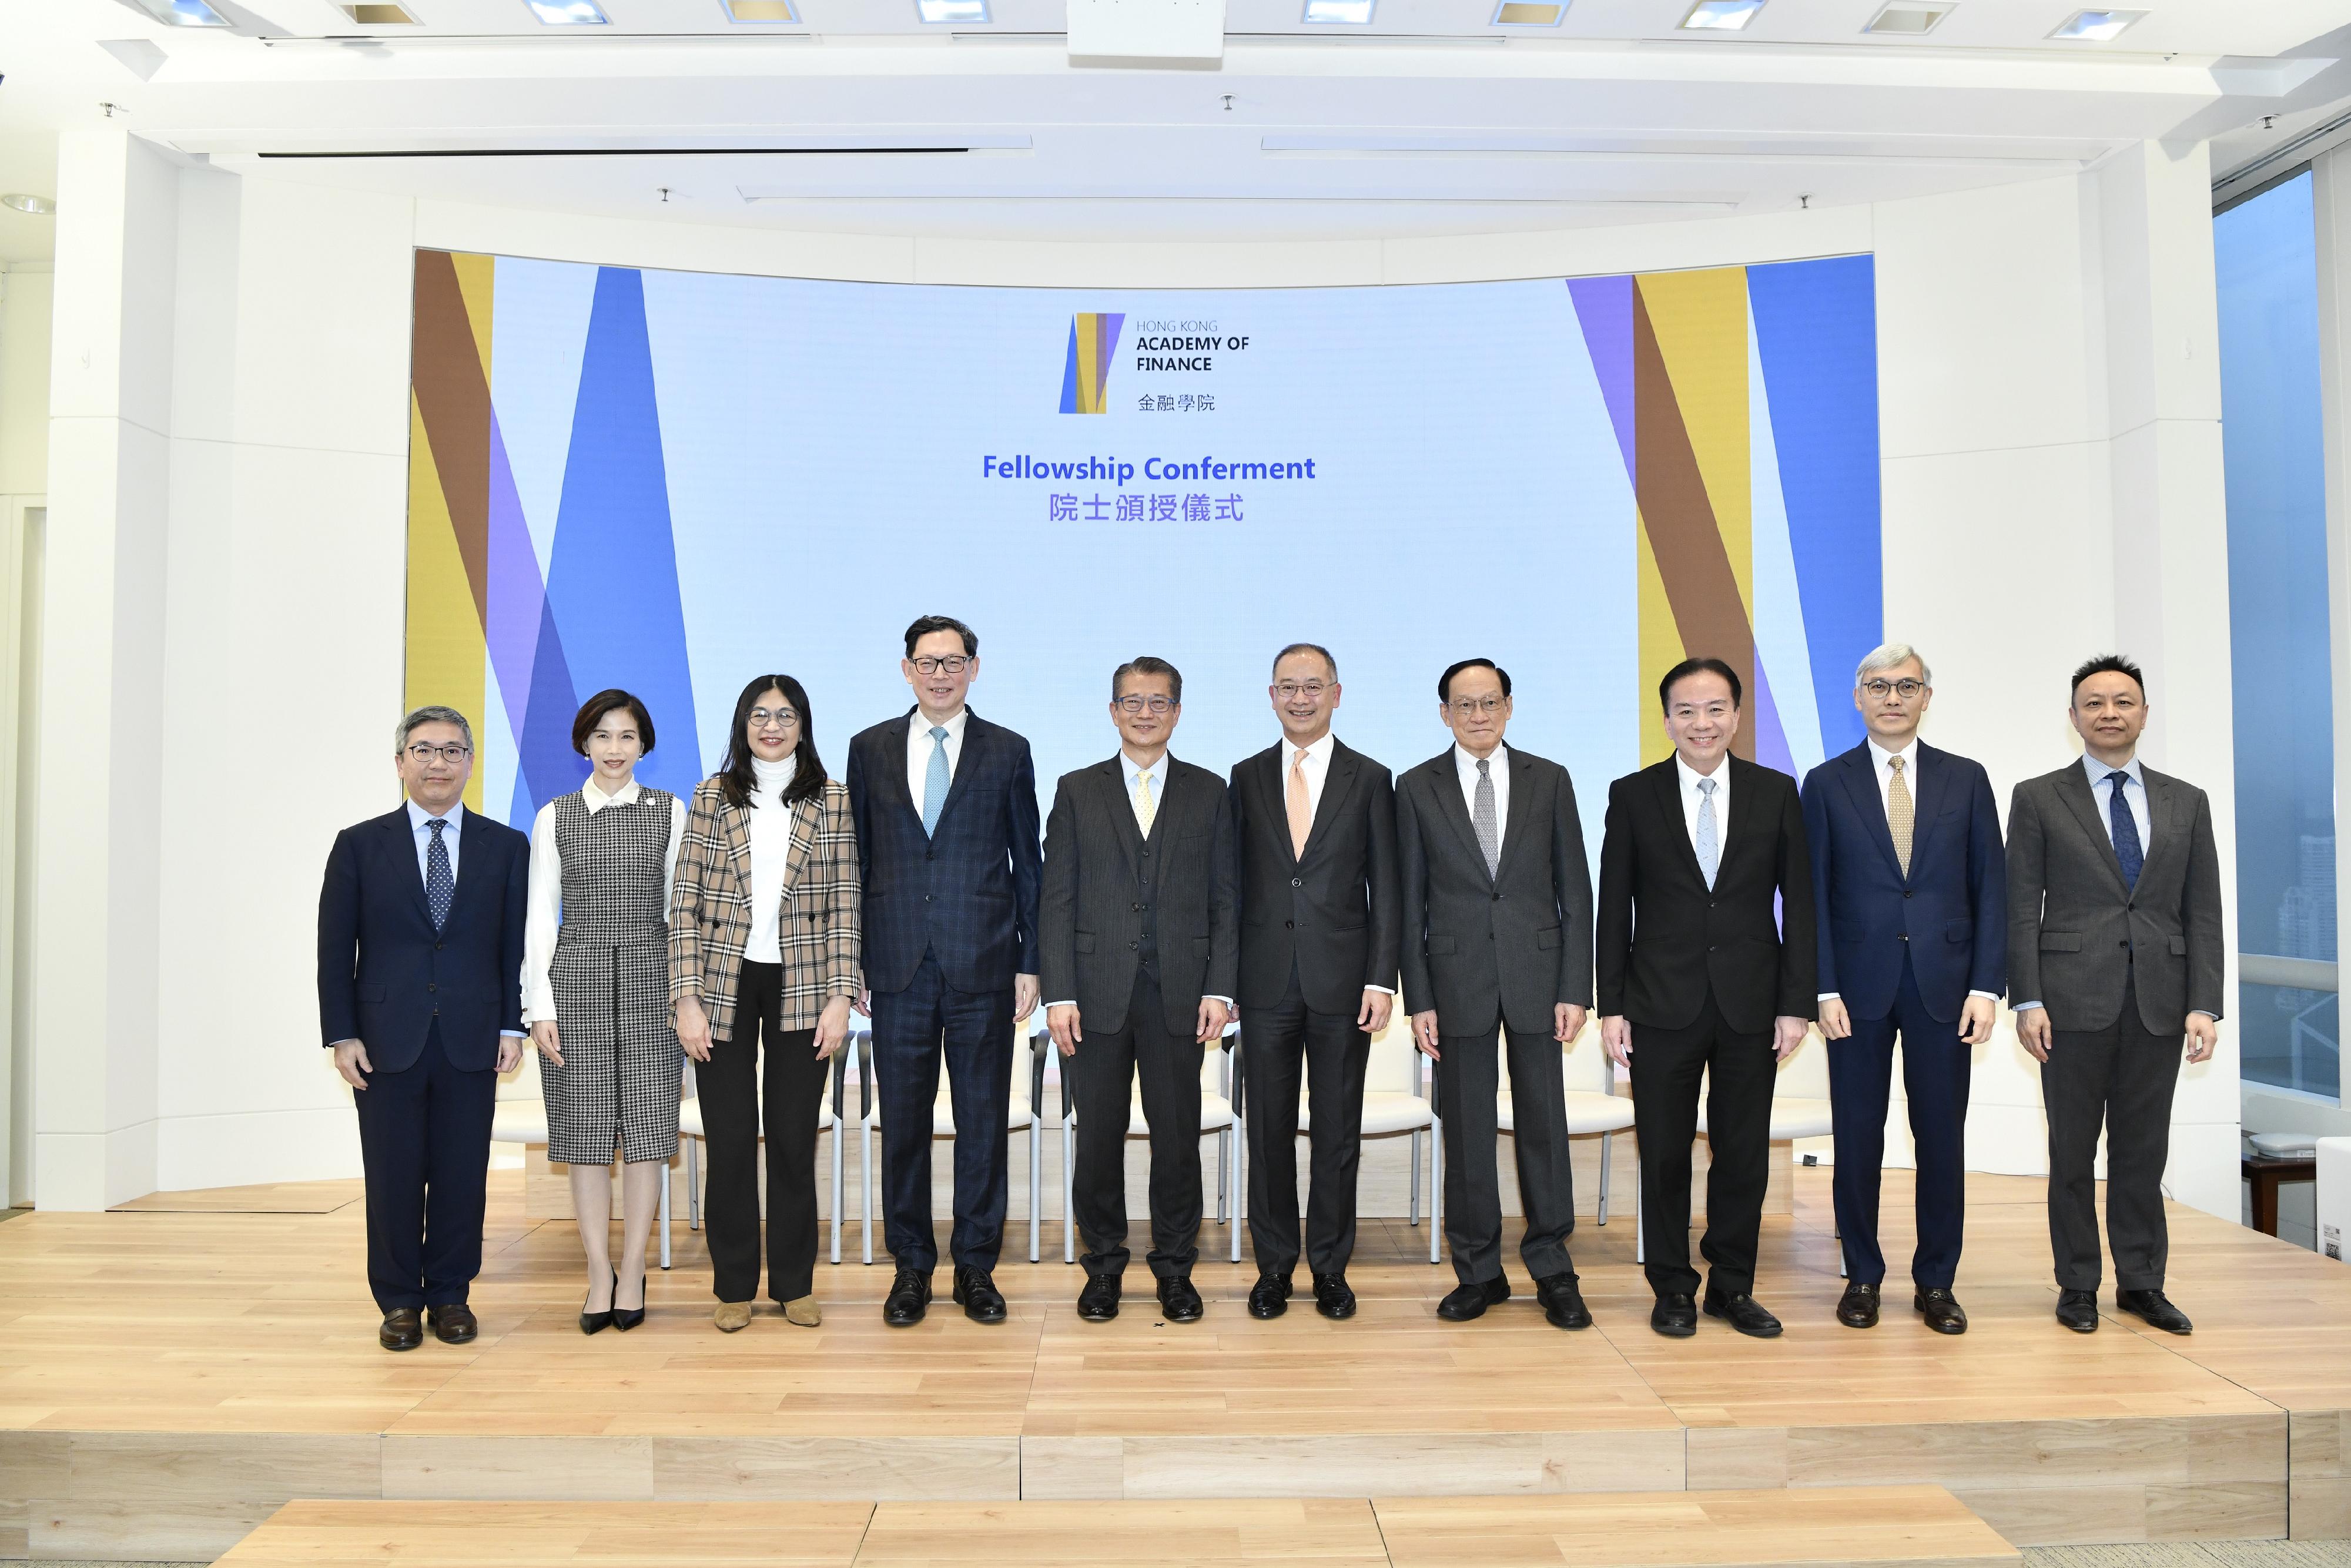 The Hong Kong Academy of Finance (AoF) confers Fellowship to three new Fellows today (December 14), including Dr Norman Chan (fourth left), Mr Edward Chen (fourth right) and Mr David Wong (third right). Photo shows the Financial Secretary and the Honorary President of the AoF, Mr Paul Chan (fifth left), the Chief Executive of the Hong Kong Monetary Authority and the Chairman of the AoF, Mr Eddie Yue (fifth right), and members of the Board of Directors of the AoF in a group photo with three new Fellows.